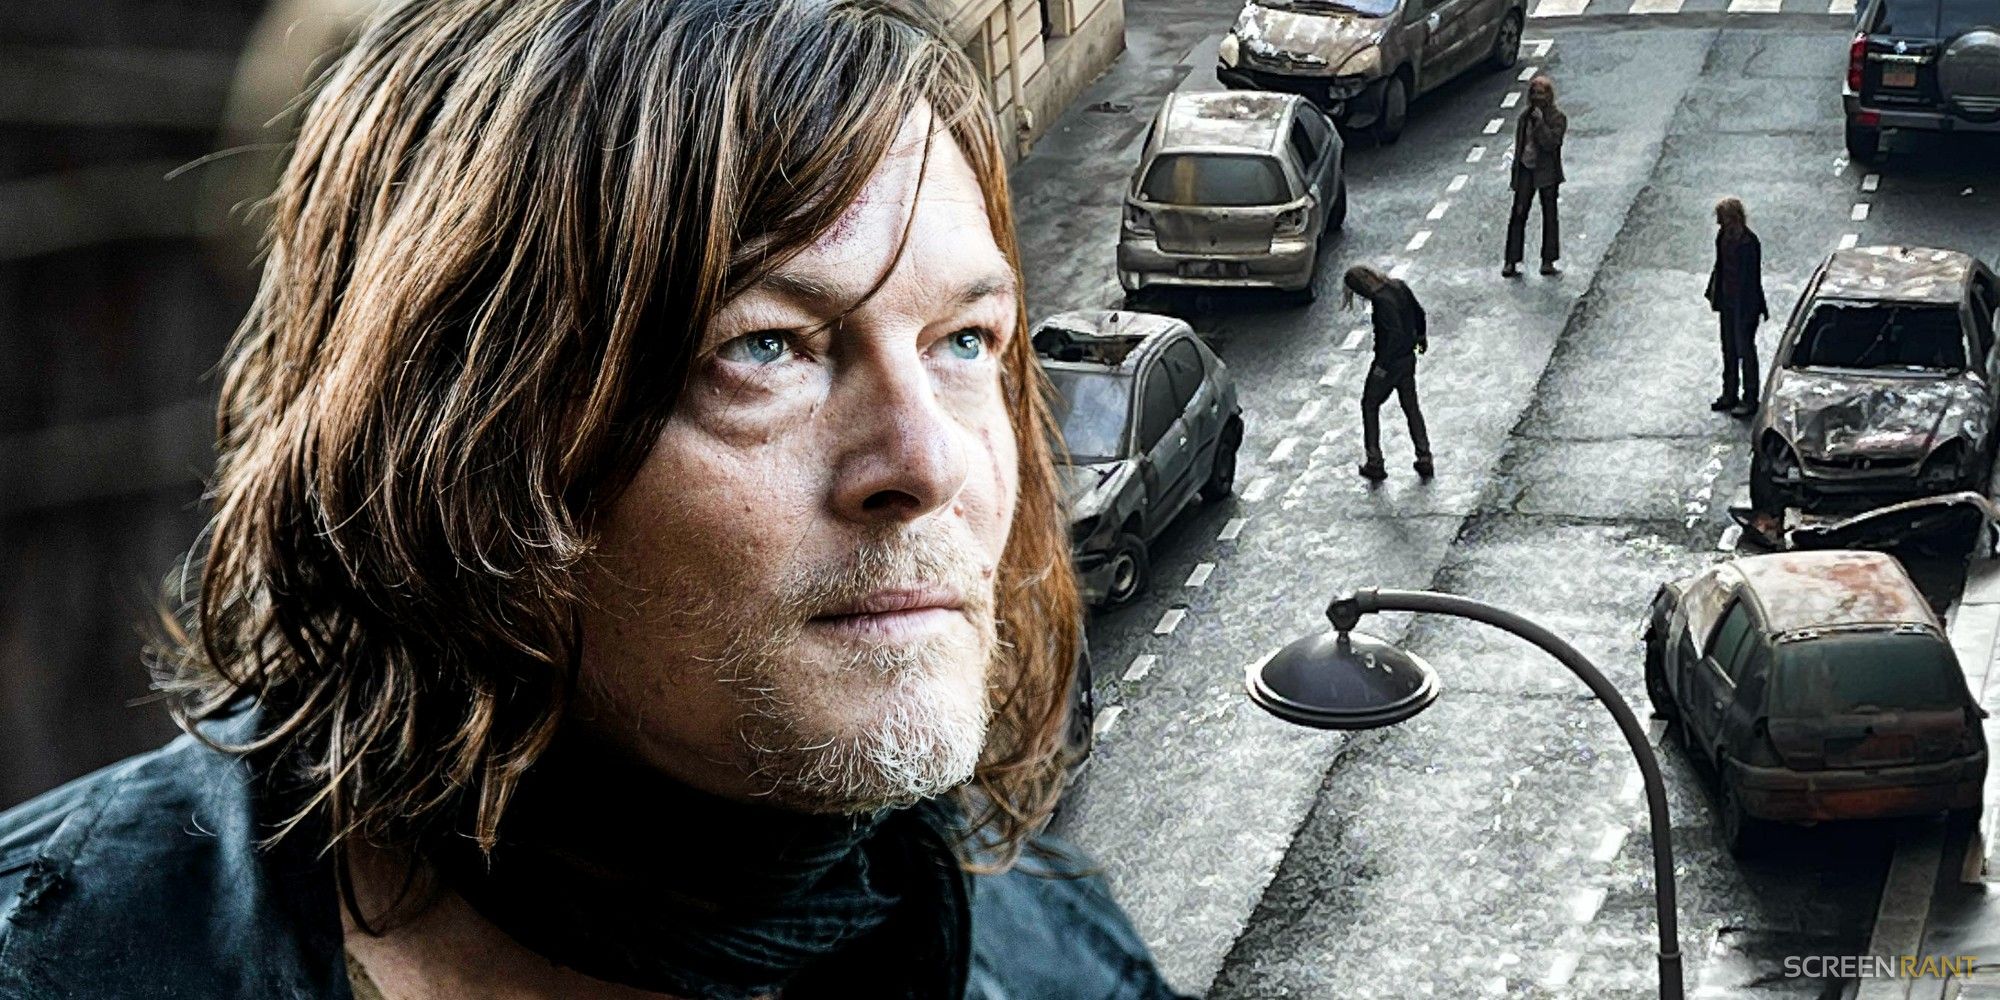 Norman Reedus as Daryl superimposed over set photo of zombies in Paris